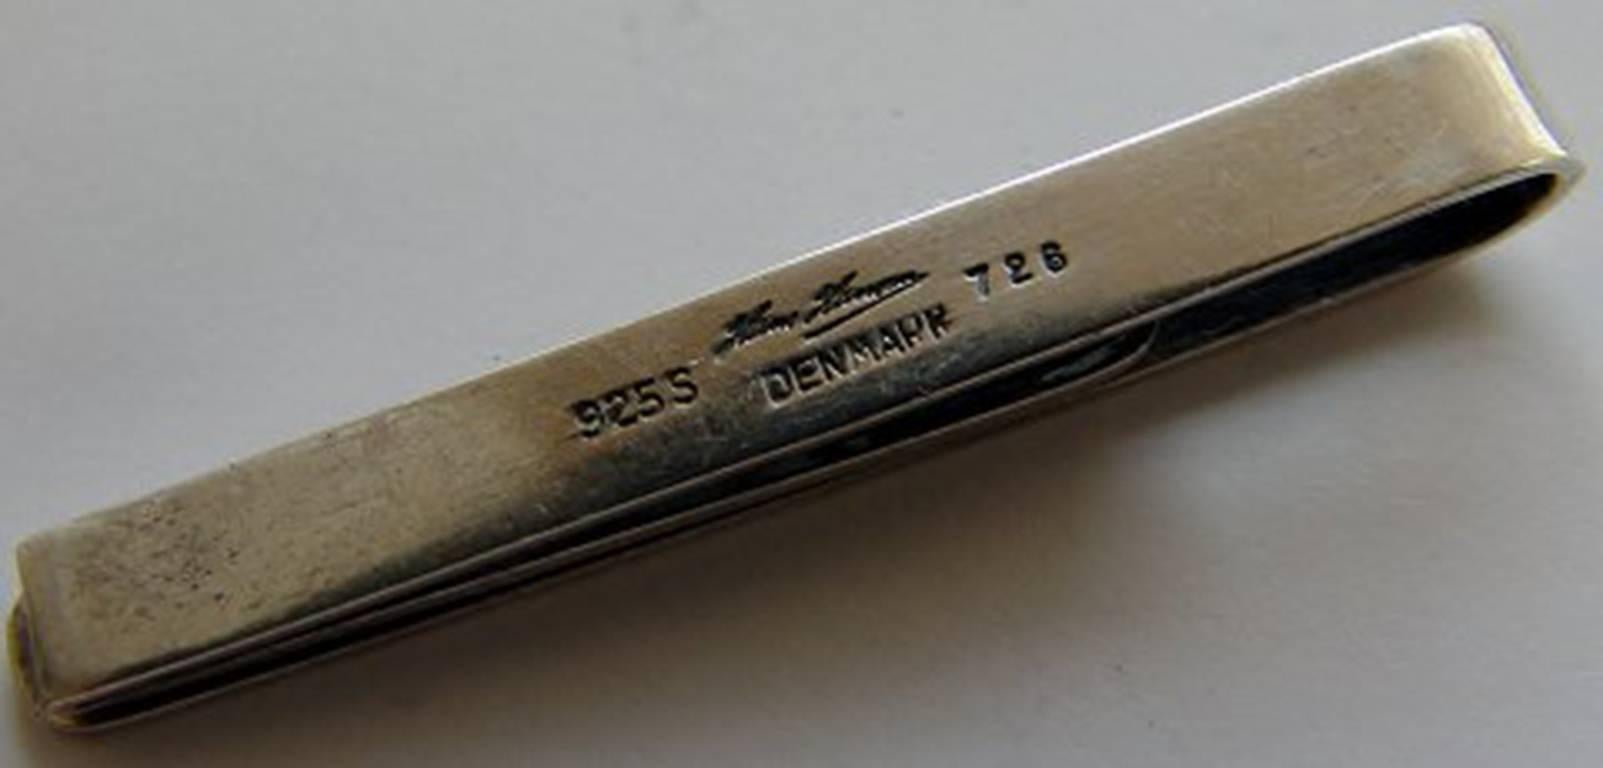 Hans Hansen Tie Bar in Sterling Silver No 726. Measures 5.5 cm / 2 11/64 in. and is in good condition. Weighs 10.3 g / 0.36 oz.